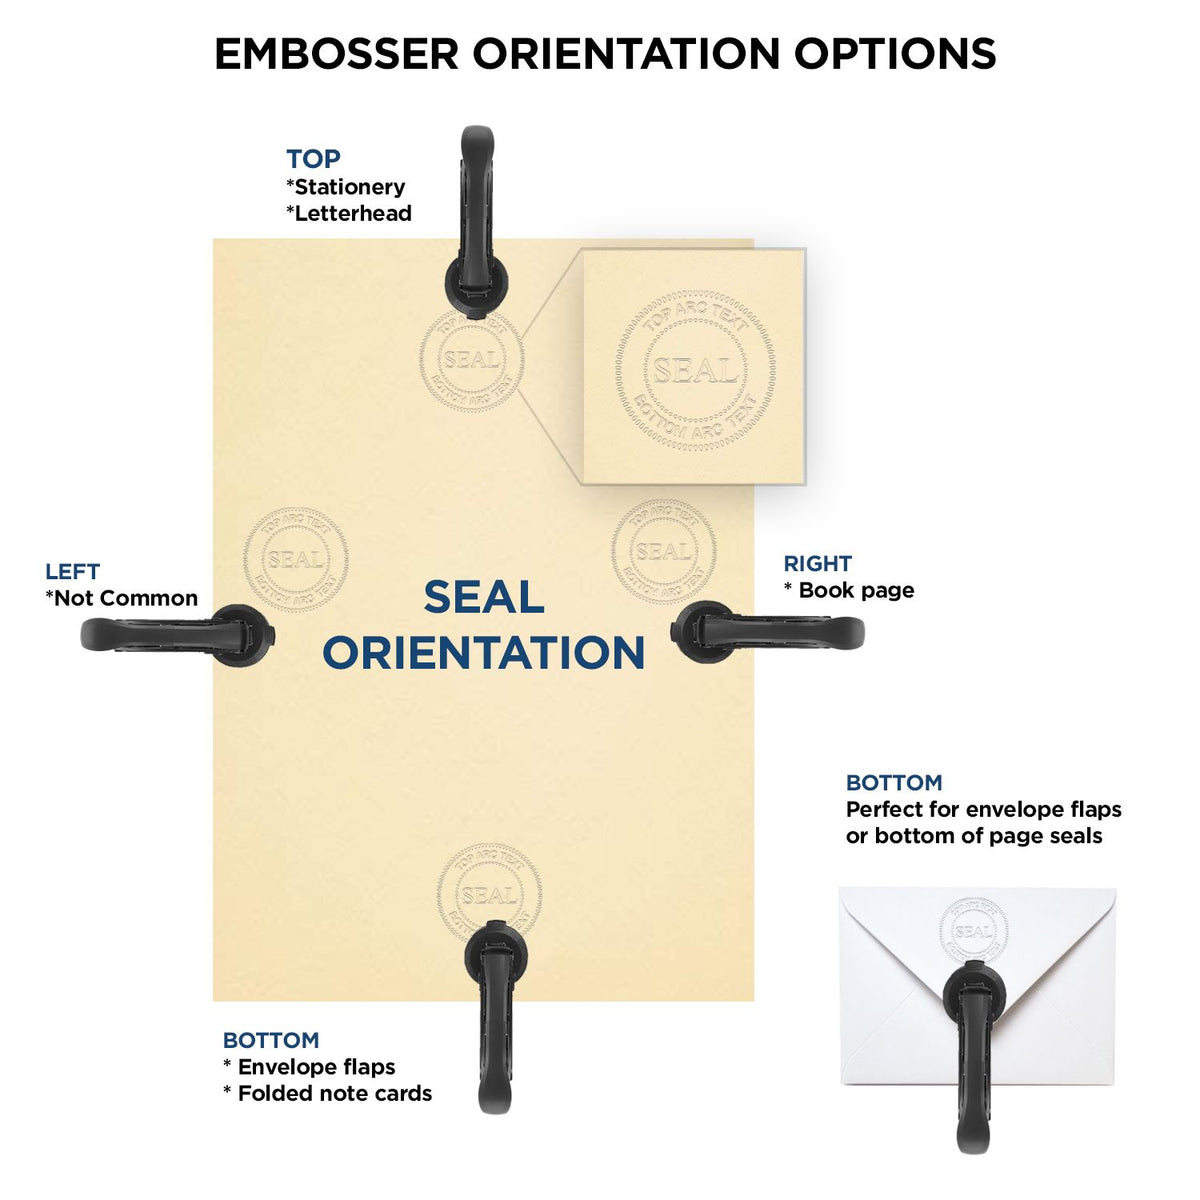 An infographic for the State of Delaware Extended Long Reach Engineer Seal showing embosser orientation, this is showing examples of a top, bottom, right and left insert.